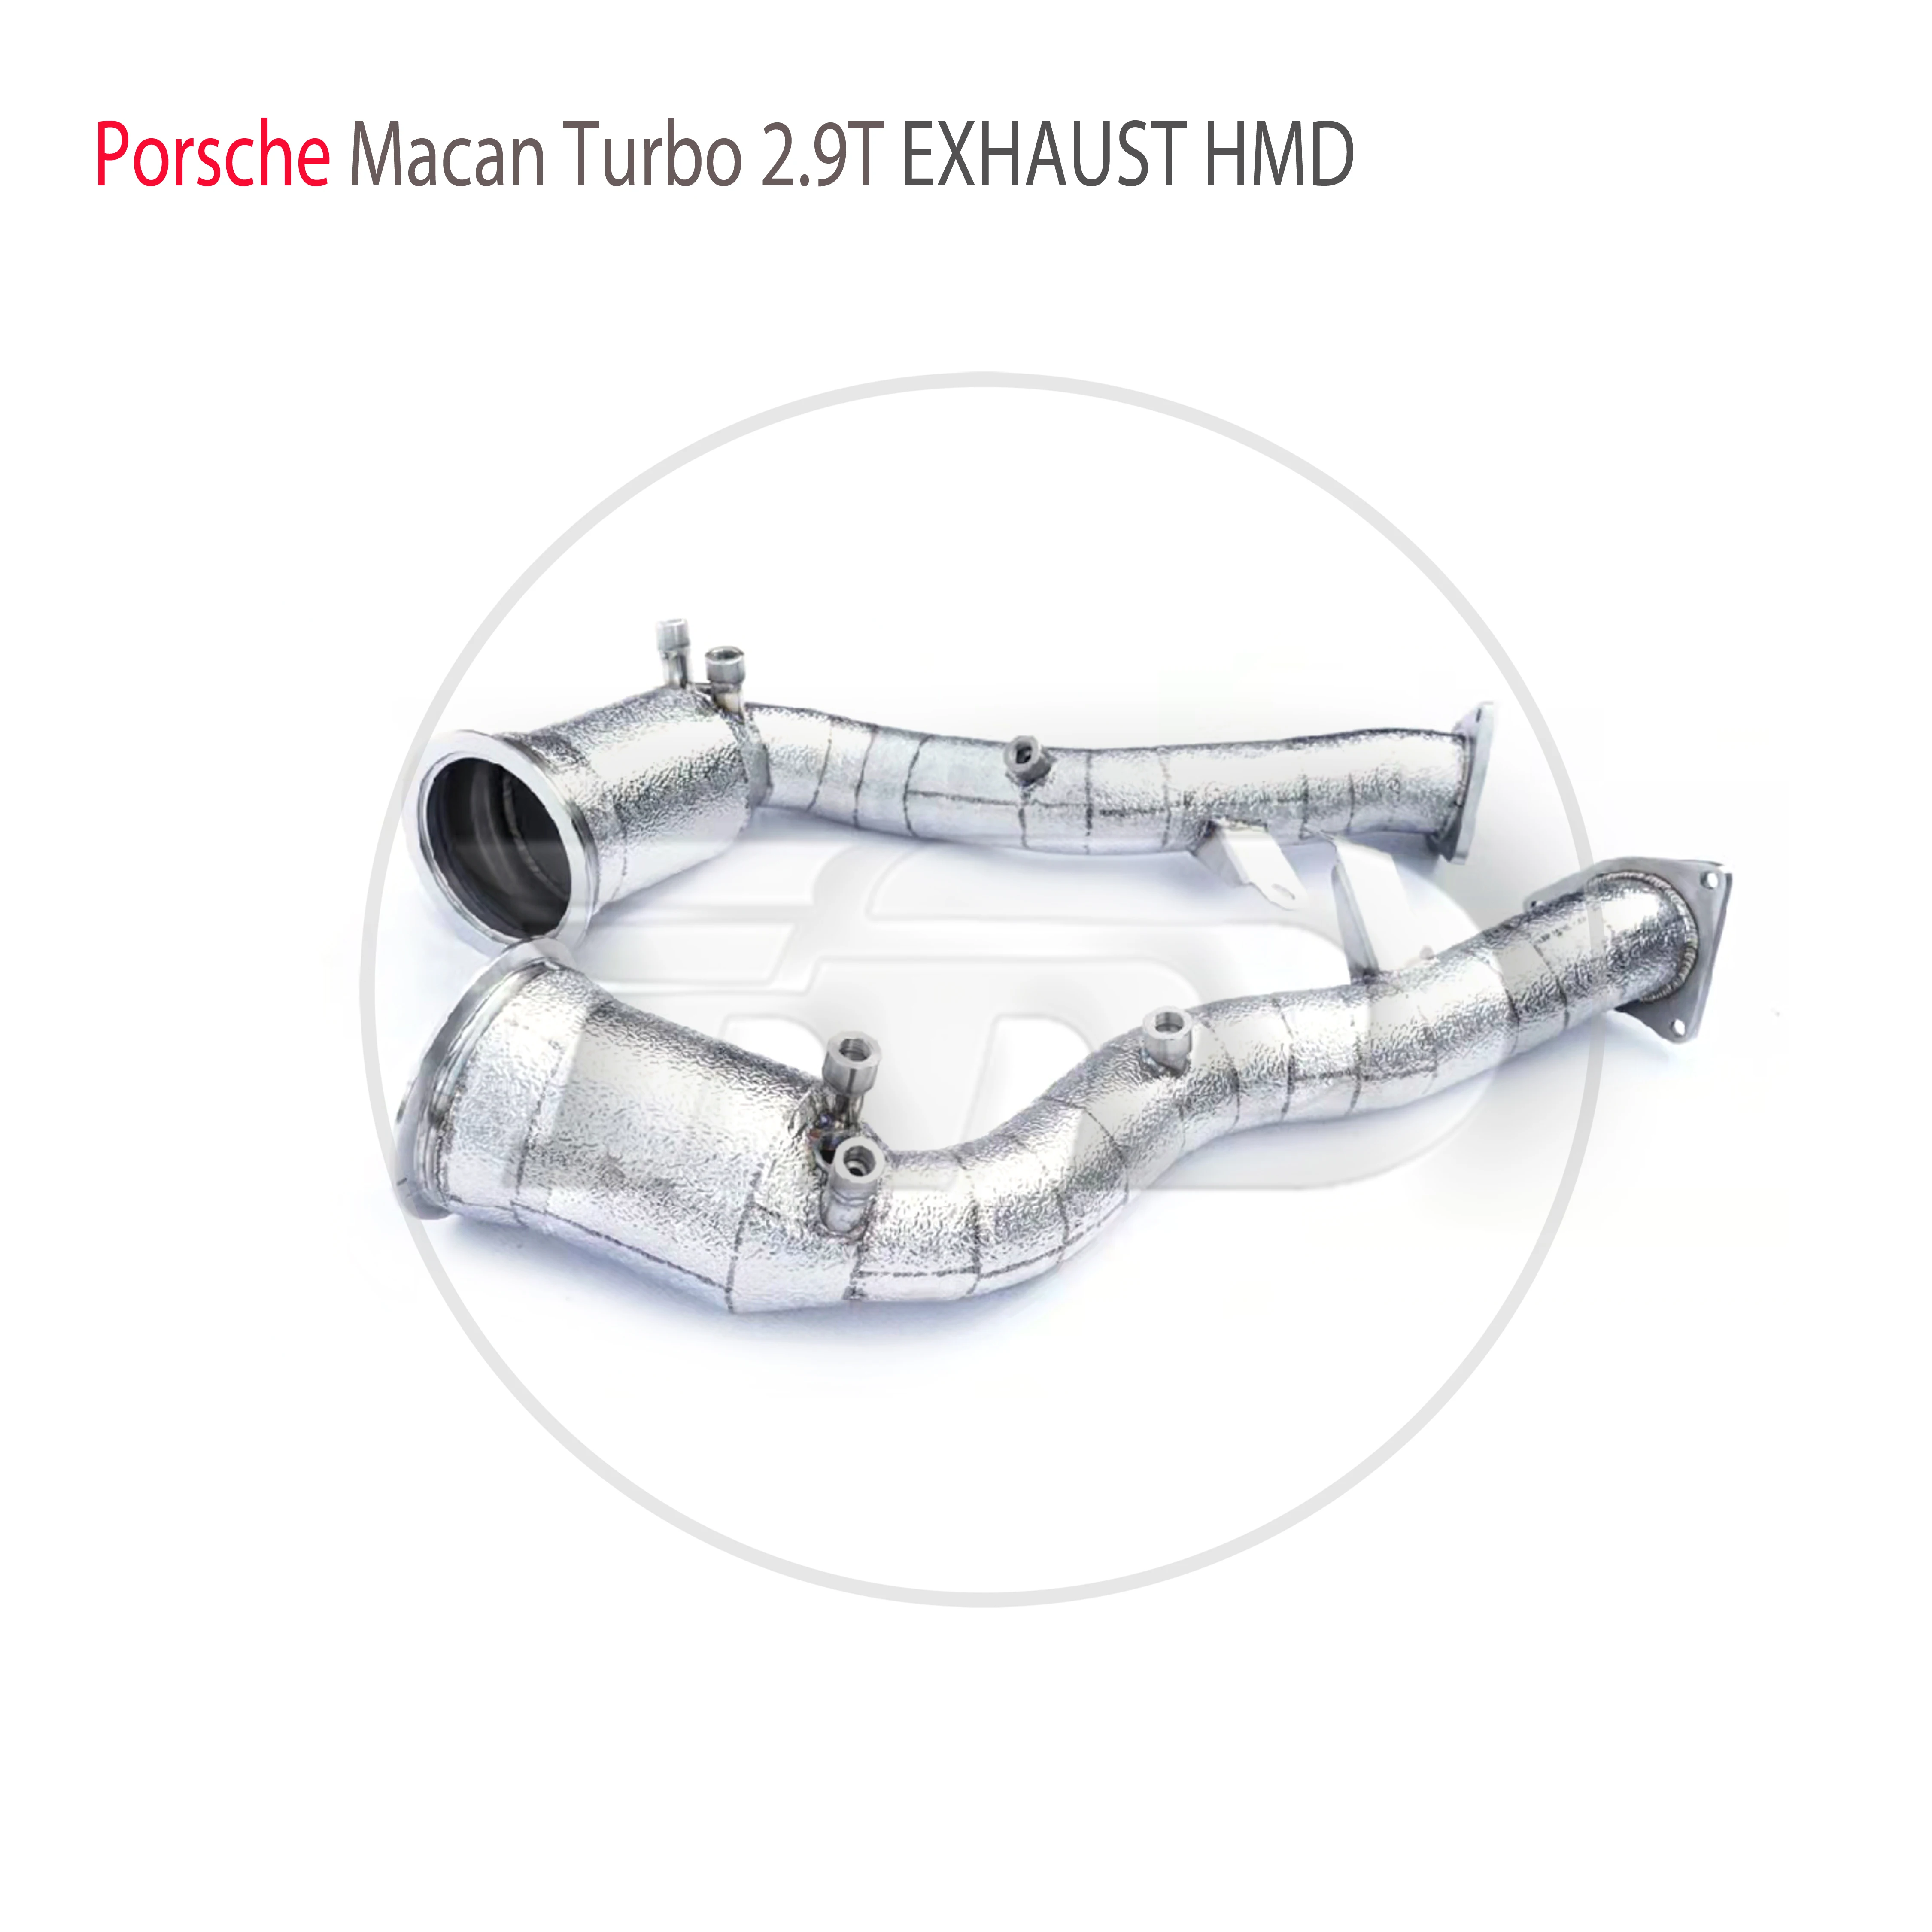 

HMD Exhaust System High Flow Performance Downpipe for Porsche Macan Turbo GTS 2.9T Catalytic Converter Headers